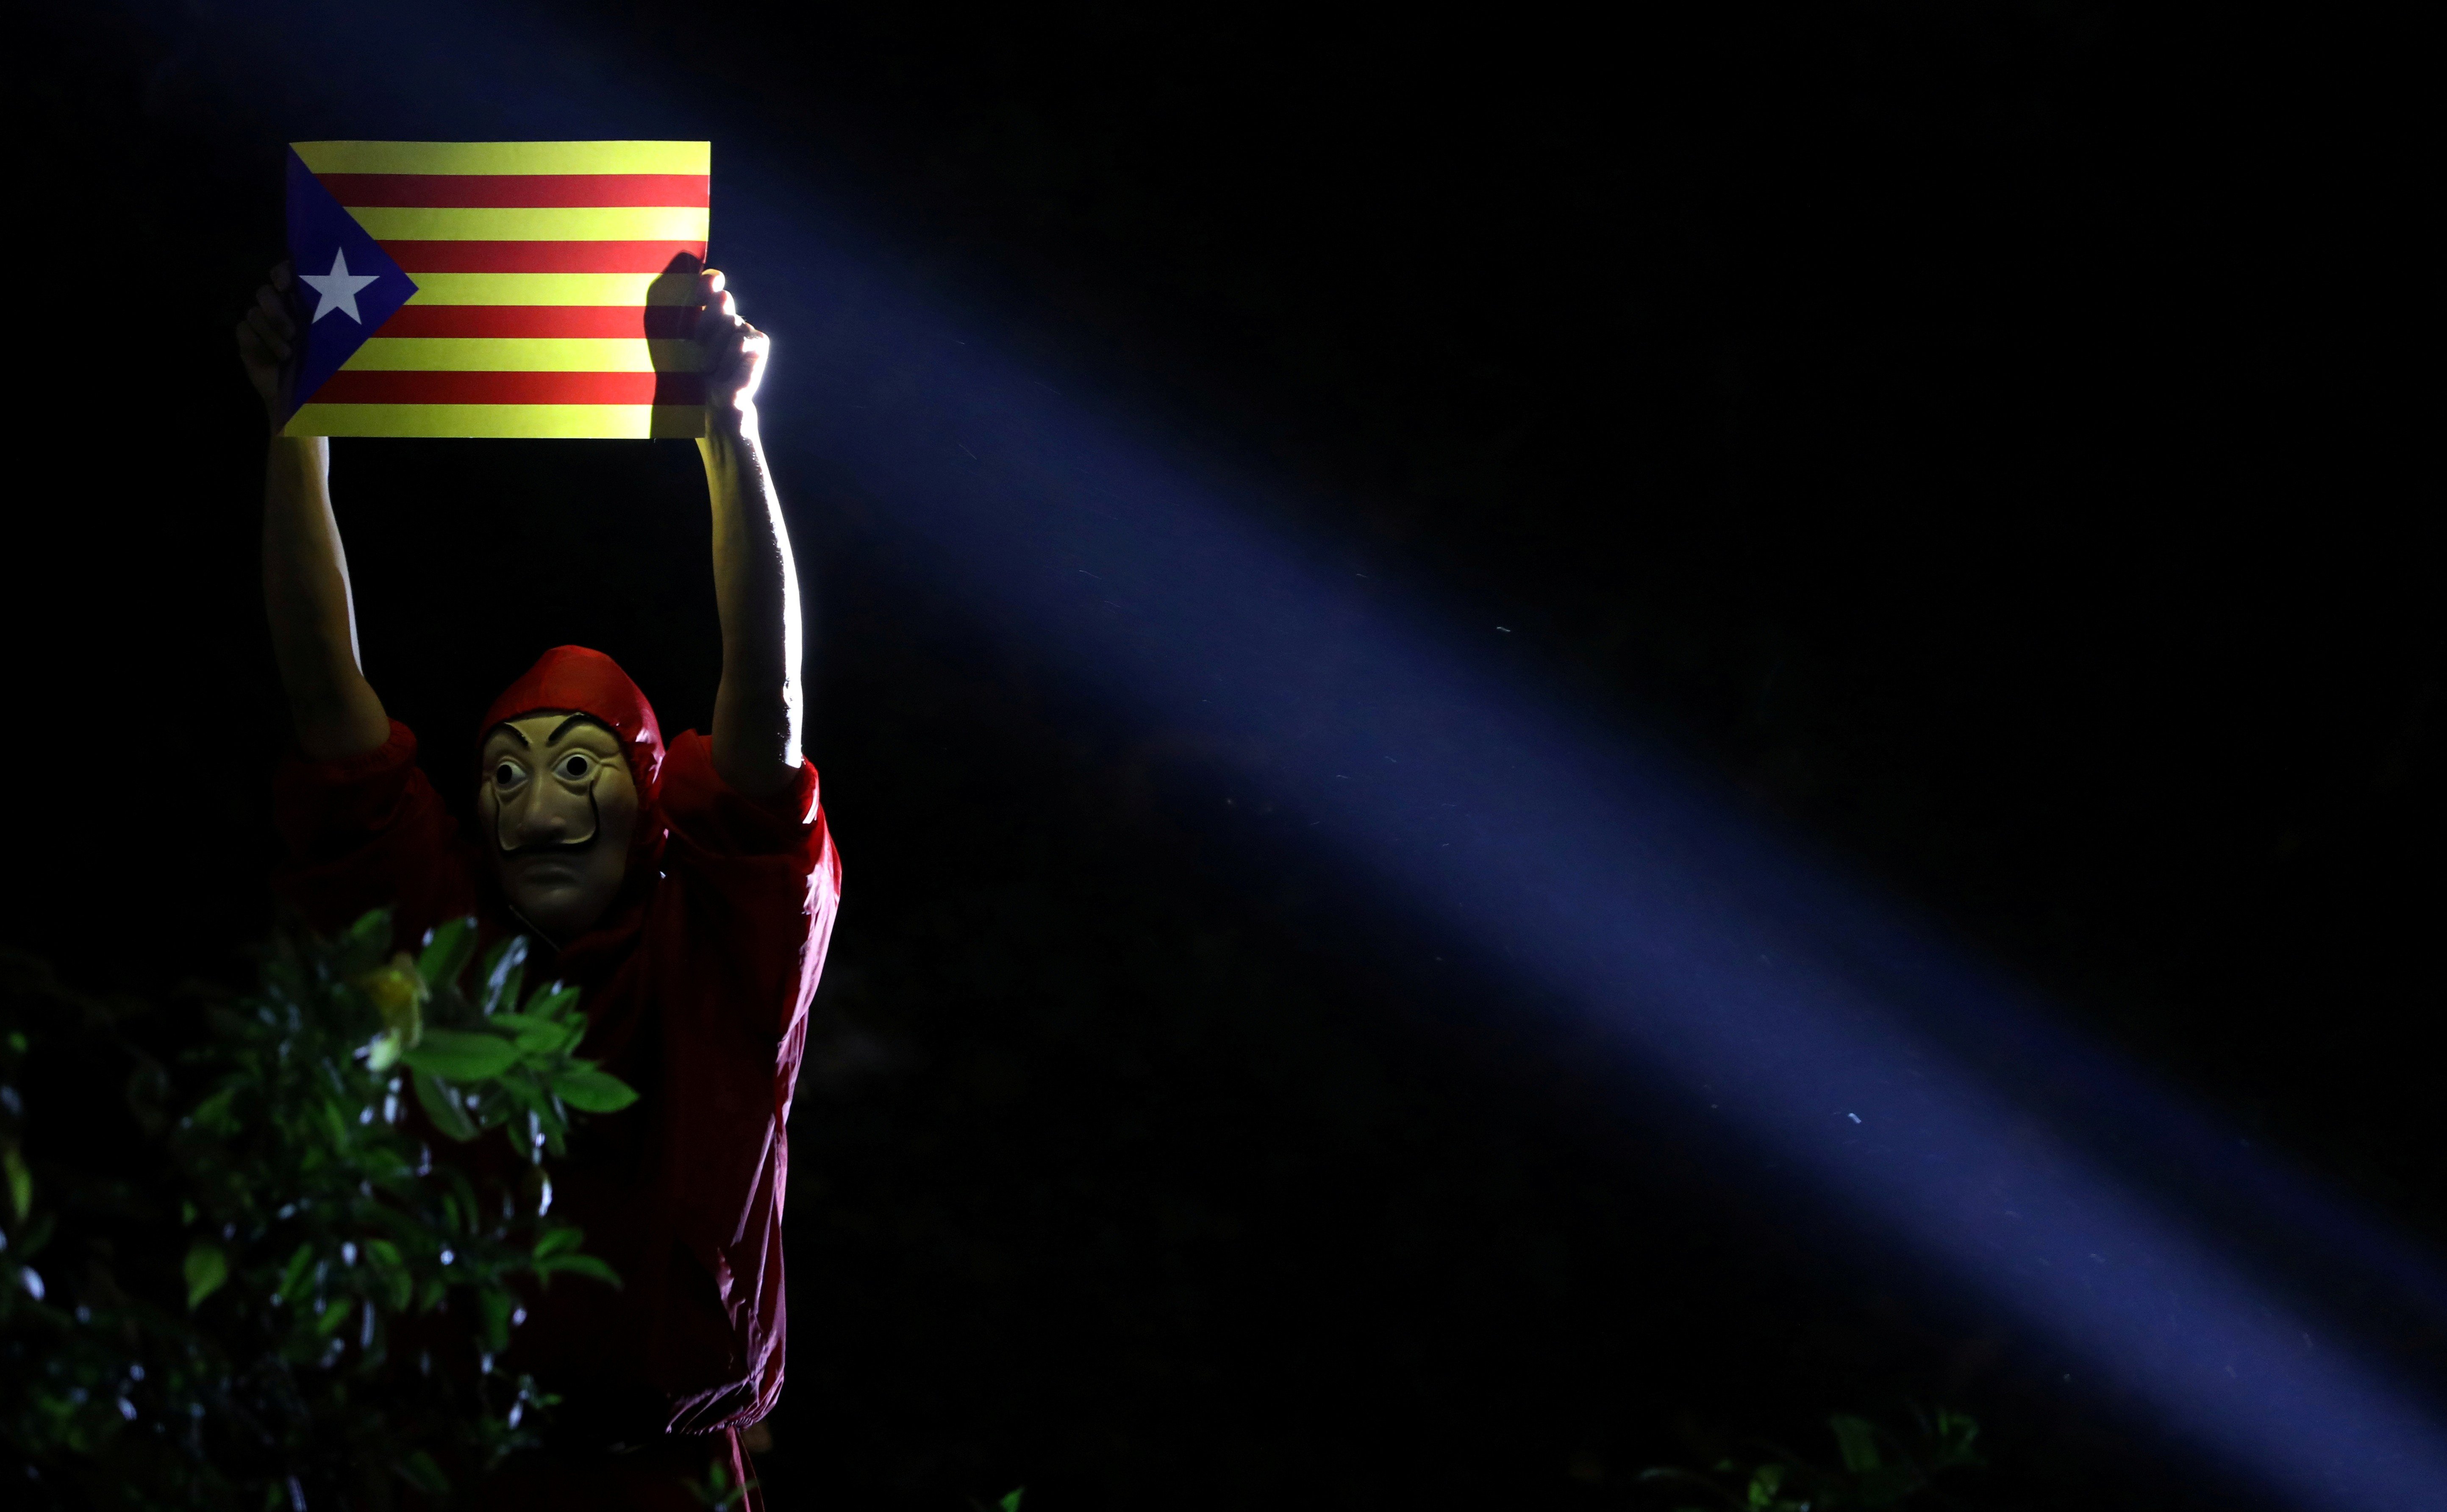 An anti-government demonstrator in Chater Garden, Hong Kong, on October 24 holds a Catalan flag to show solidarity with Catalonia’s independence movement. Photo: Reuters